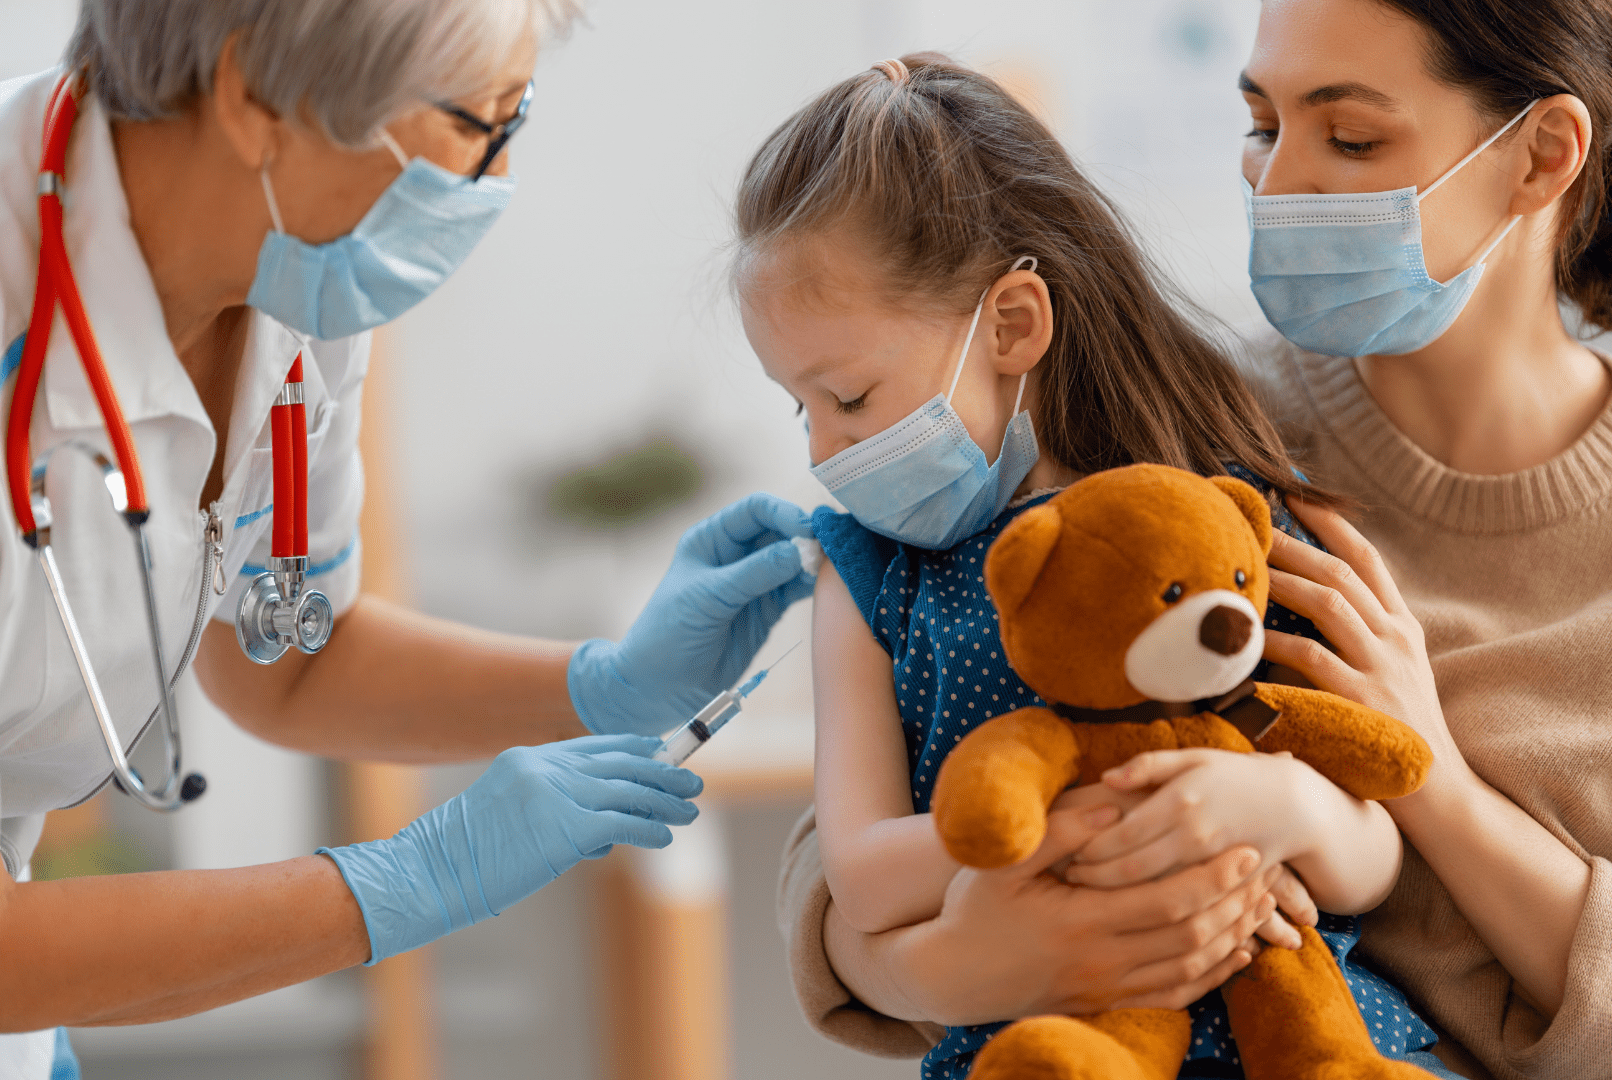 Featured image for “East Toronto Health Partners announces strategy for delivering COVID-19 vaccines to local children aged 5 to 11 to help ensure safe, family-friendly and low-barrier access to vaccines”